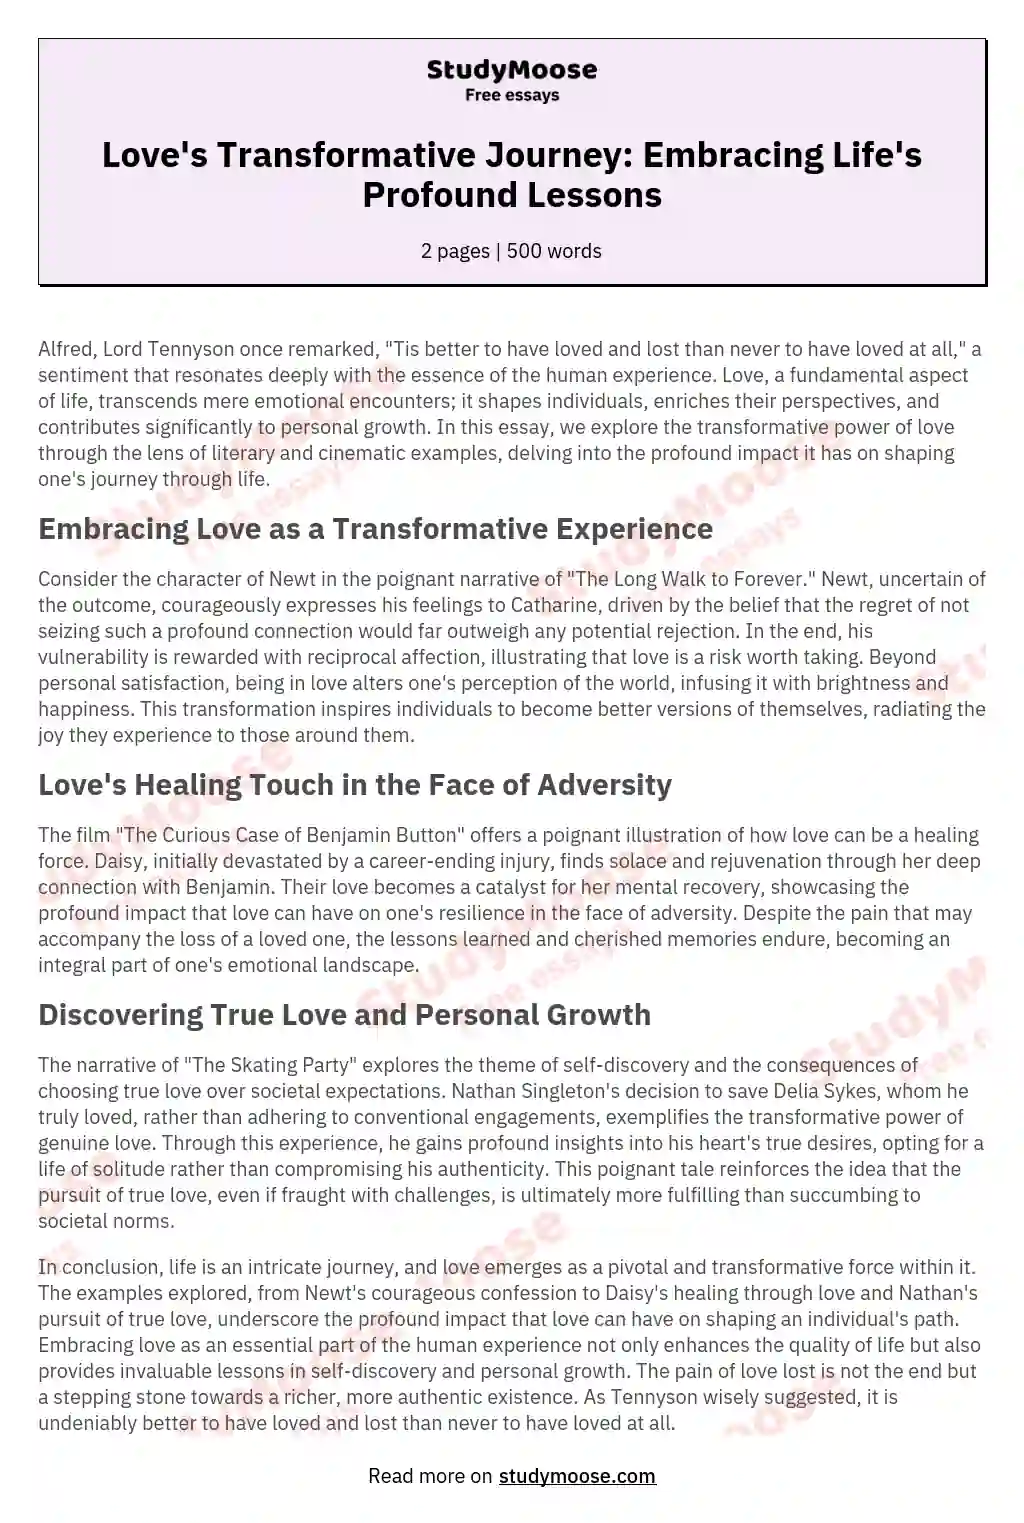 Love's Transformative Journey: Embracing Life's Profound Lessons essay